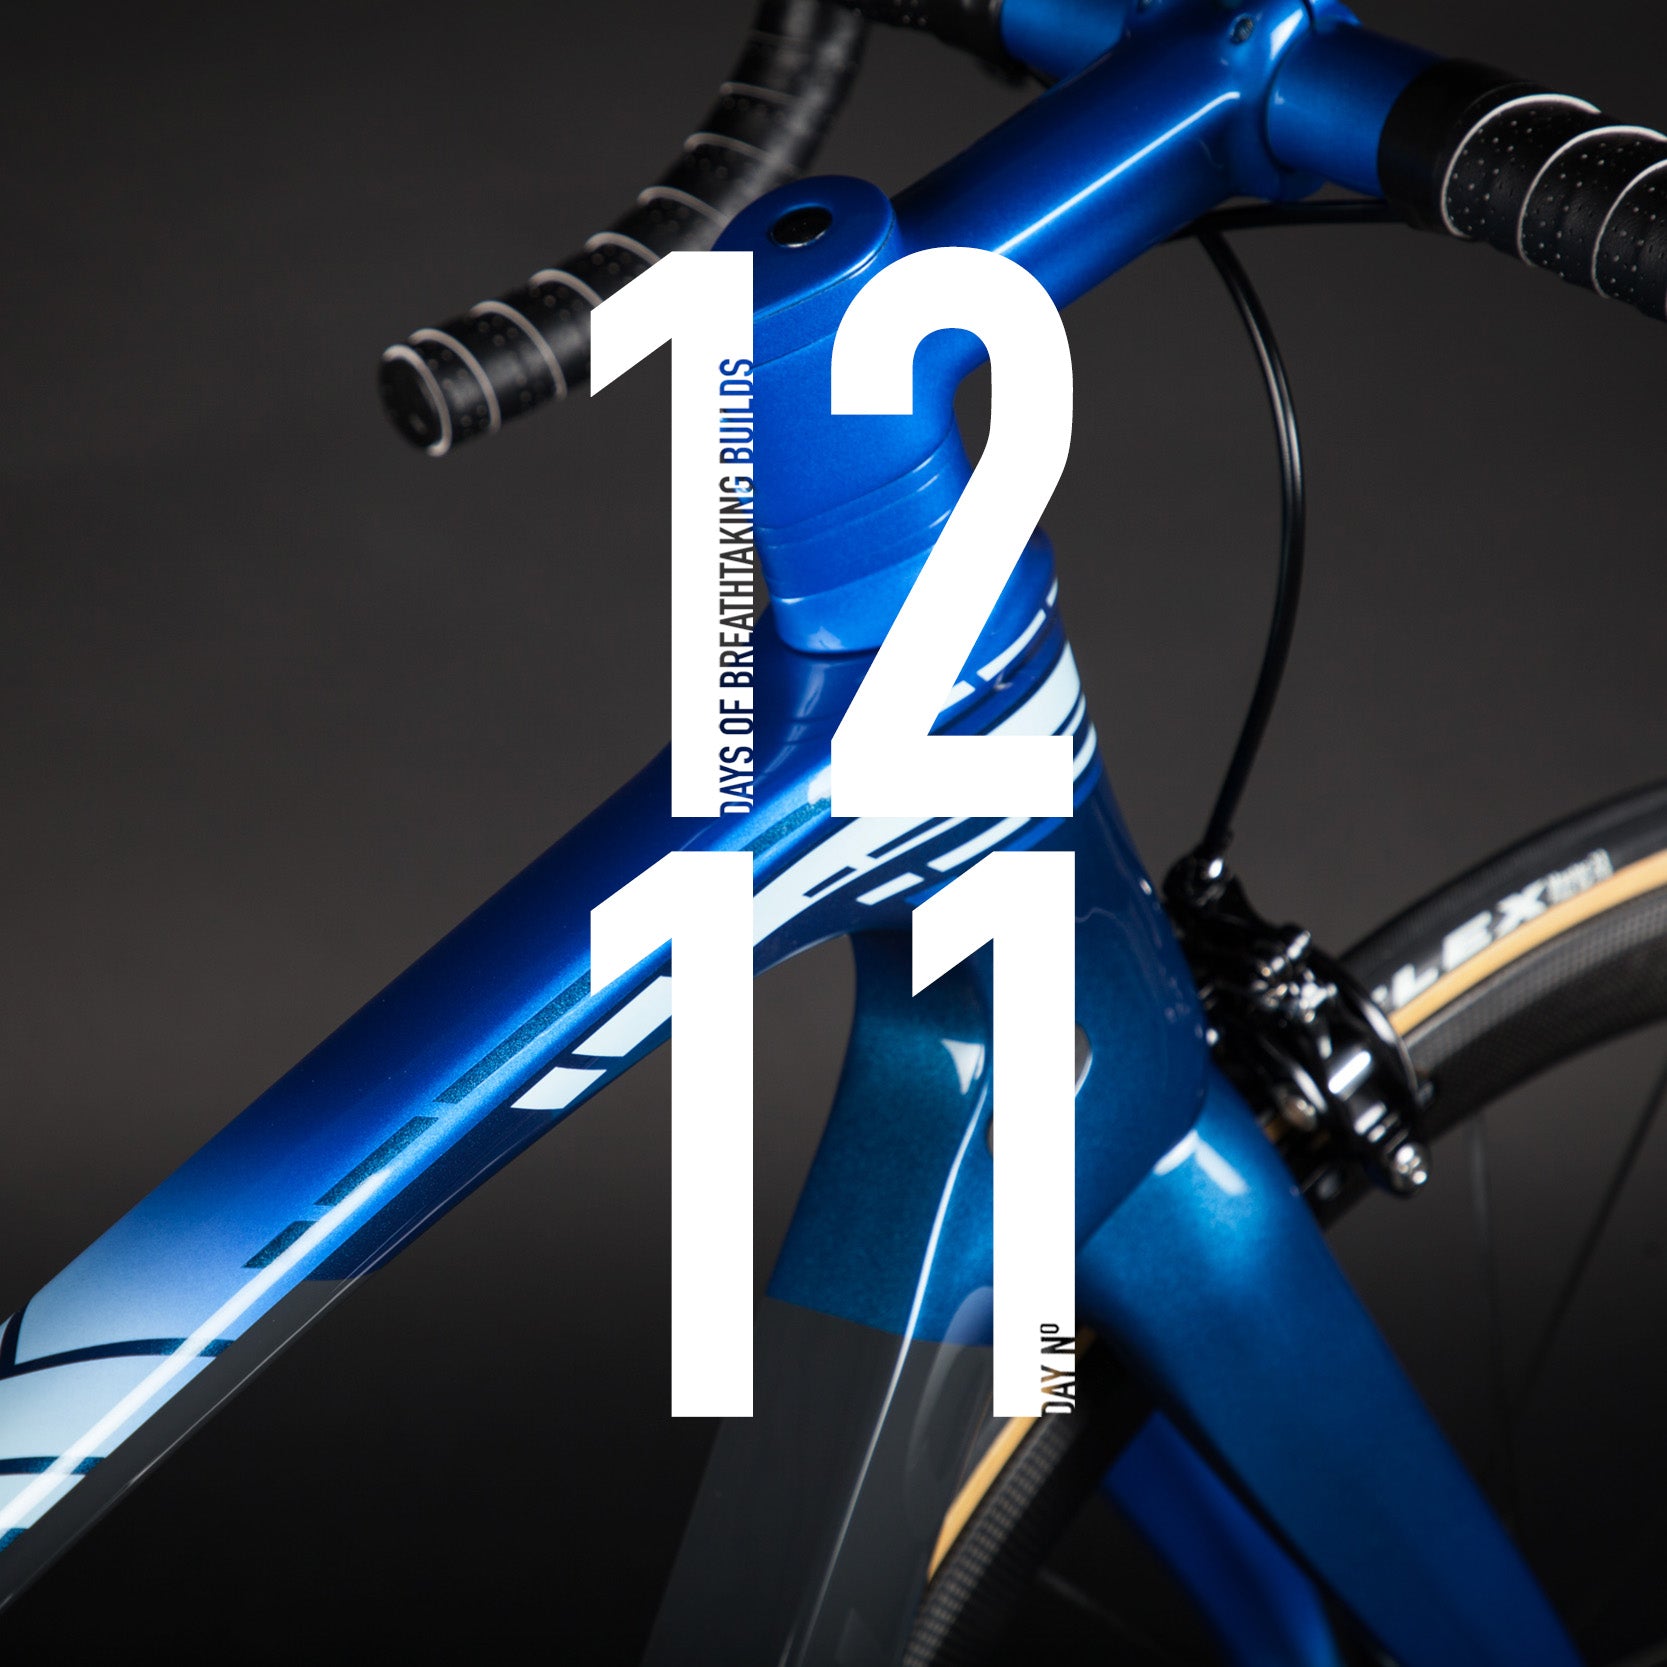 Twelve Days of Breathtaking Builds—Day 11: A Dogma Like No Other